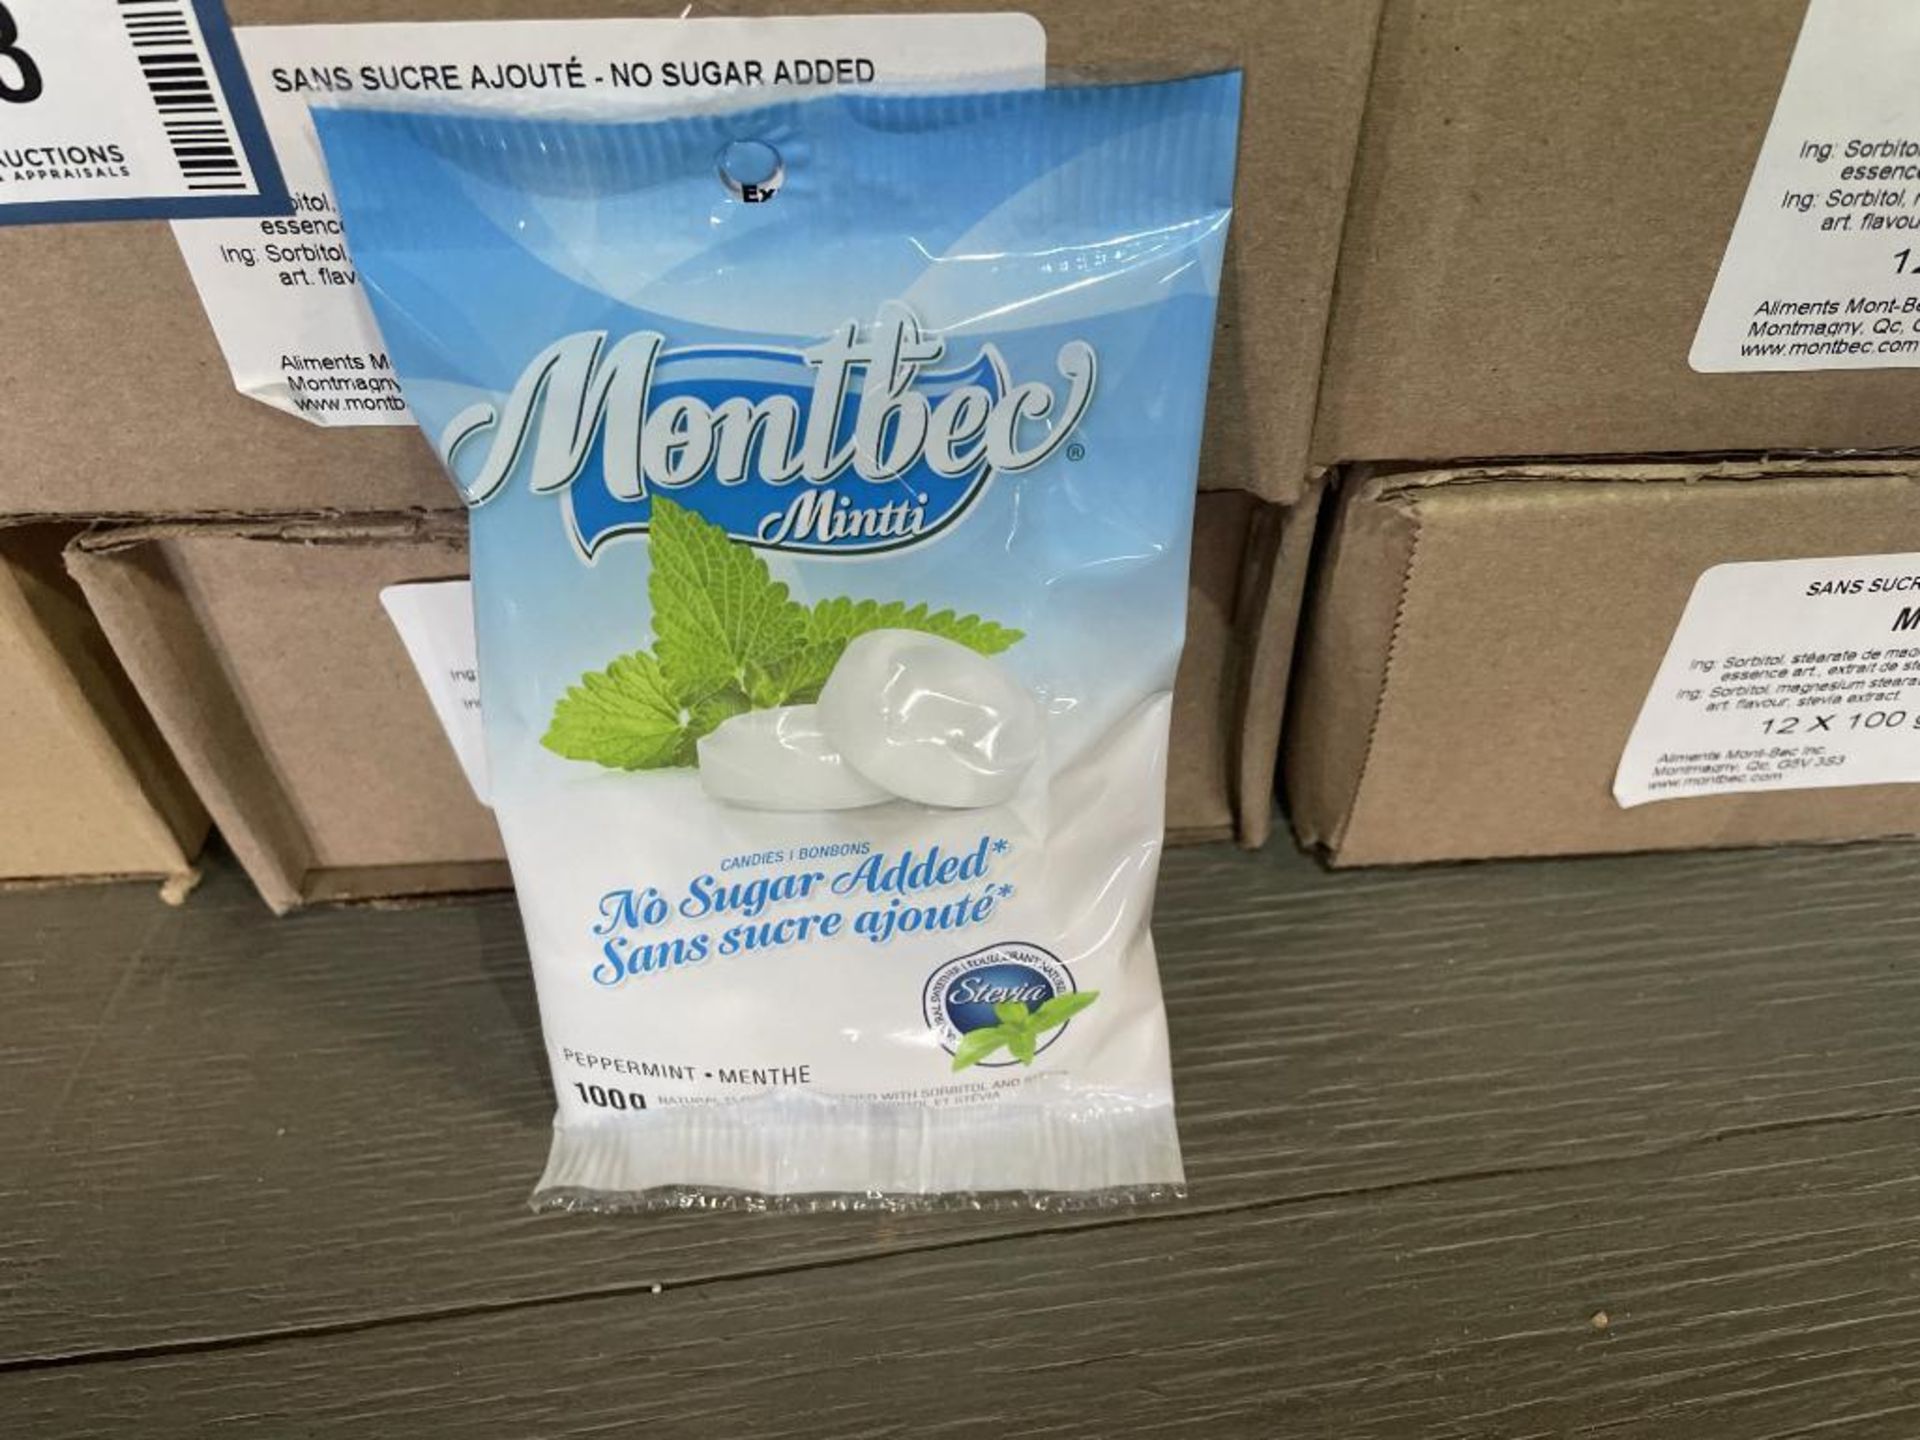 (4) BOXES OF MONTBEC NO SUGAR ADDED PEPPERMINT MINTS & (3) BOXES OF LICORICE MINTS, 12/100G PER BOX - Image 3 of 3